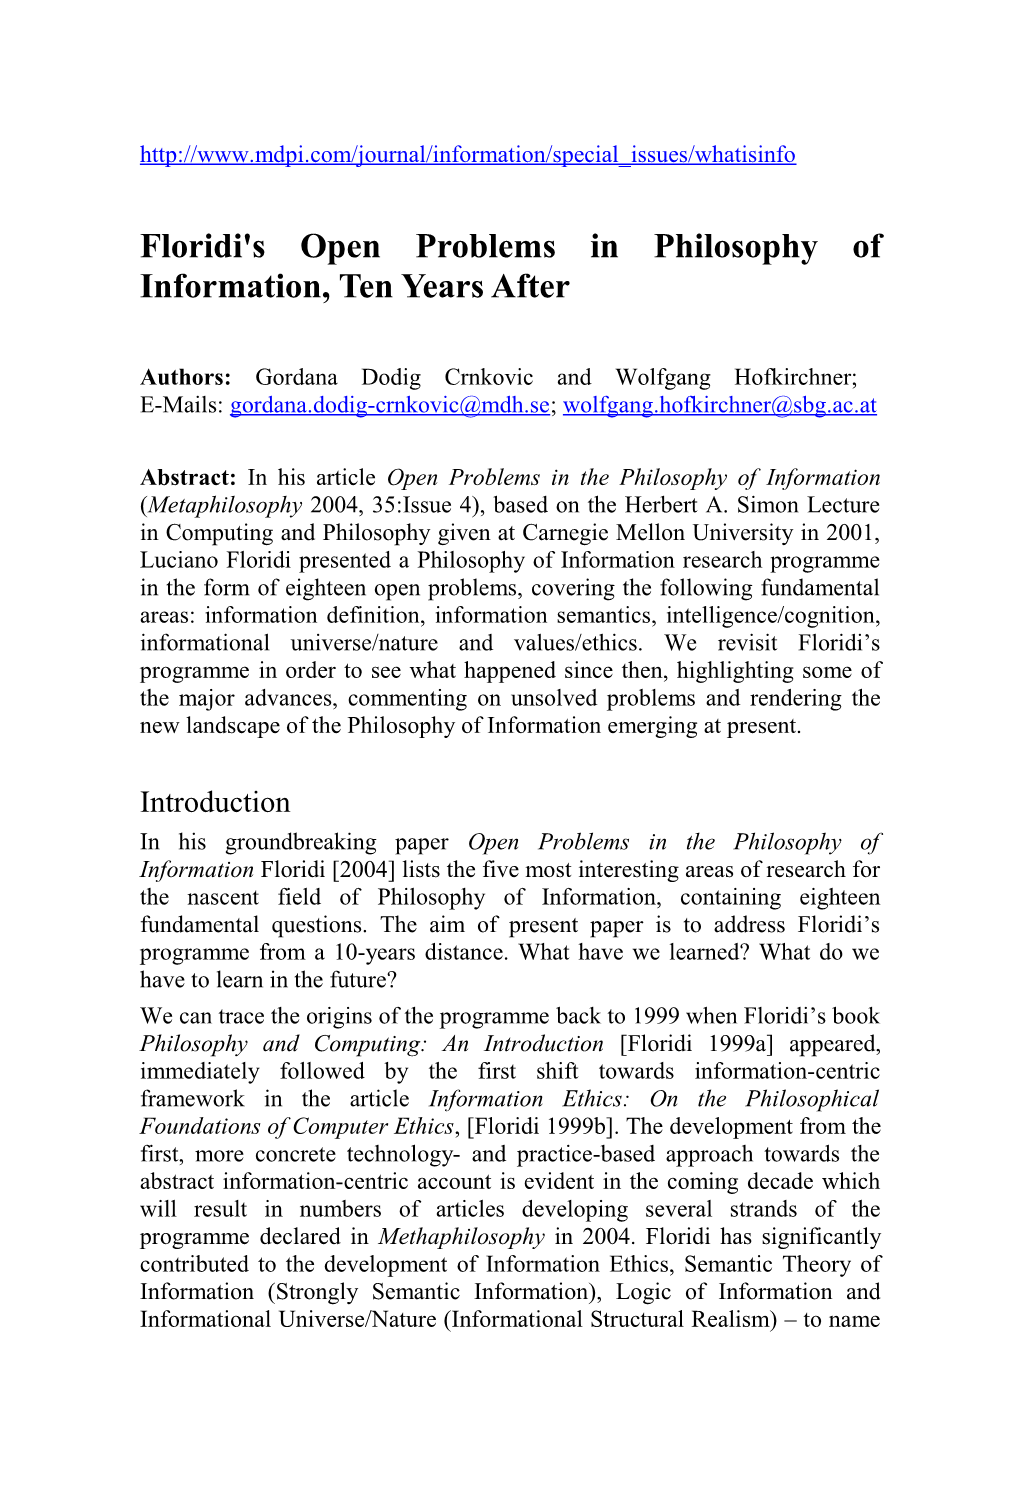 Floridi's Open Problems in Philosophy of Information, Ten Years After